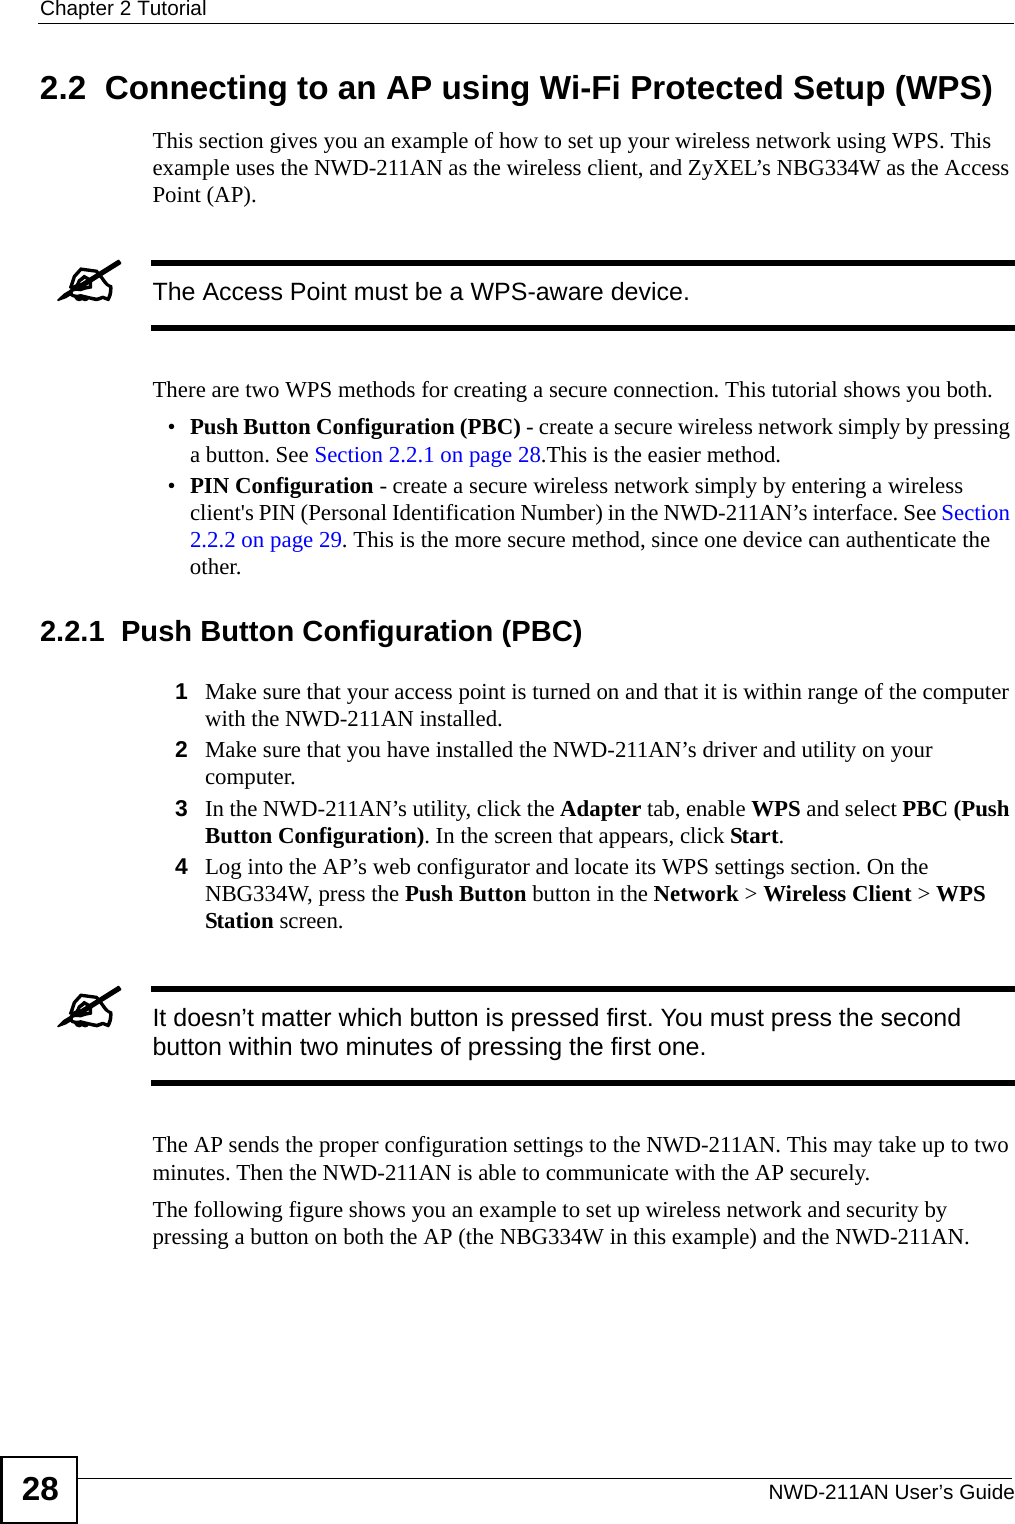 Chapter 2 TutorialNWD-211AN User’s Guide282.2  Connecting to an AP using Wi-Fi Protected Setup (WPS)This section gives you an example of how to set up your wireless network using WPS. This example uses the NWD-211AN as the wireless client, and ZyXEL’s NBG334W as the Access Point (AP). &quot;The Access Point must be a WPS-aware device.There are two WPS methods for creating a secure connection. This tutorial shows you both.•Push Button Configuration (PBC) - create a secure wireless network simply by pressing a button. See Section 2.2.1 on page 28.This is the easier method.•PIN Configuration - create a secure wireless network simply by entering a wireless client&apos;s PIN (Personal Identification Number) in the NWD-211AN’s interface. See Section 2.2.2 on page 29. This is the more secure method, since one device can authenticate the other.2.2.1  Push Button Configuration (PBC)1Make sure that your access point is turned on and that it is within range of the computer with the NWD-211AN installed. 2Make sure that you have installed the NWD-211AN’s driver and utility on your computer.3In the NWD-211AN’s utility, click the Adapter tab, enable WPS and select PBC (Push Button Configuration). In the screen that appears, click Start. 4Log into the AP’s web configurator and locate its WPS settings section. On the NBG334W, press the Push Button button in the Network &gt; Wireless Client &gt; WPS Station screen. &quot;It doesn’t matter which button is pressed first. You must press the second button within two minutes of pressing the first one. The AP sends the proper configuration settings to the NWD-211AN. This may take up to two minutes. Then the NWD-211AN is able to communicate with the AP securely. The following figure shows you an example to set up wireless network and security by pressing a button on both the AP (the NBG334W in this example) and the NWD-211AN.